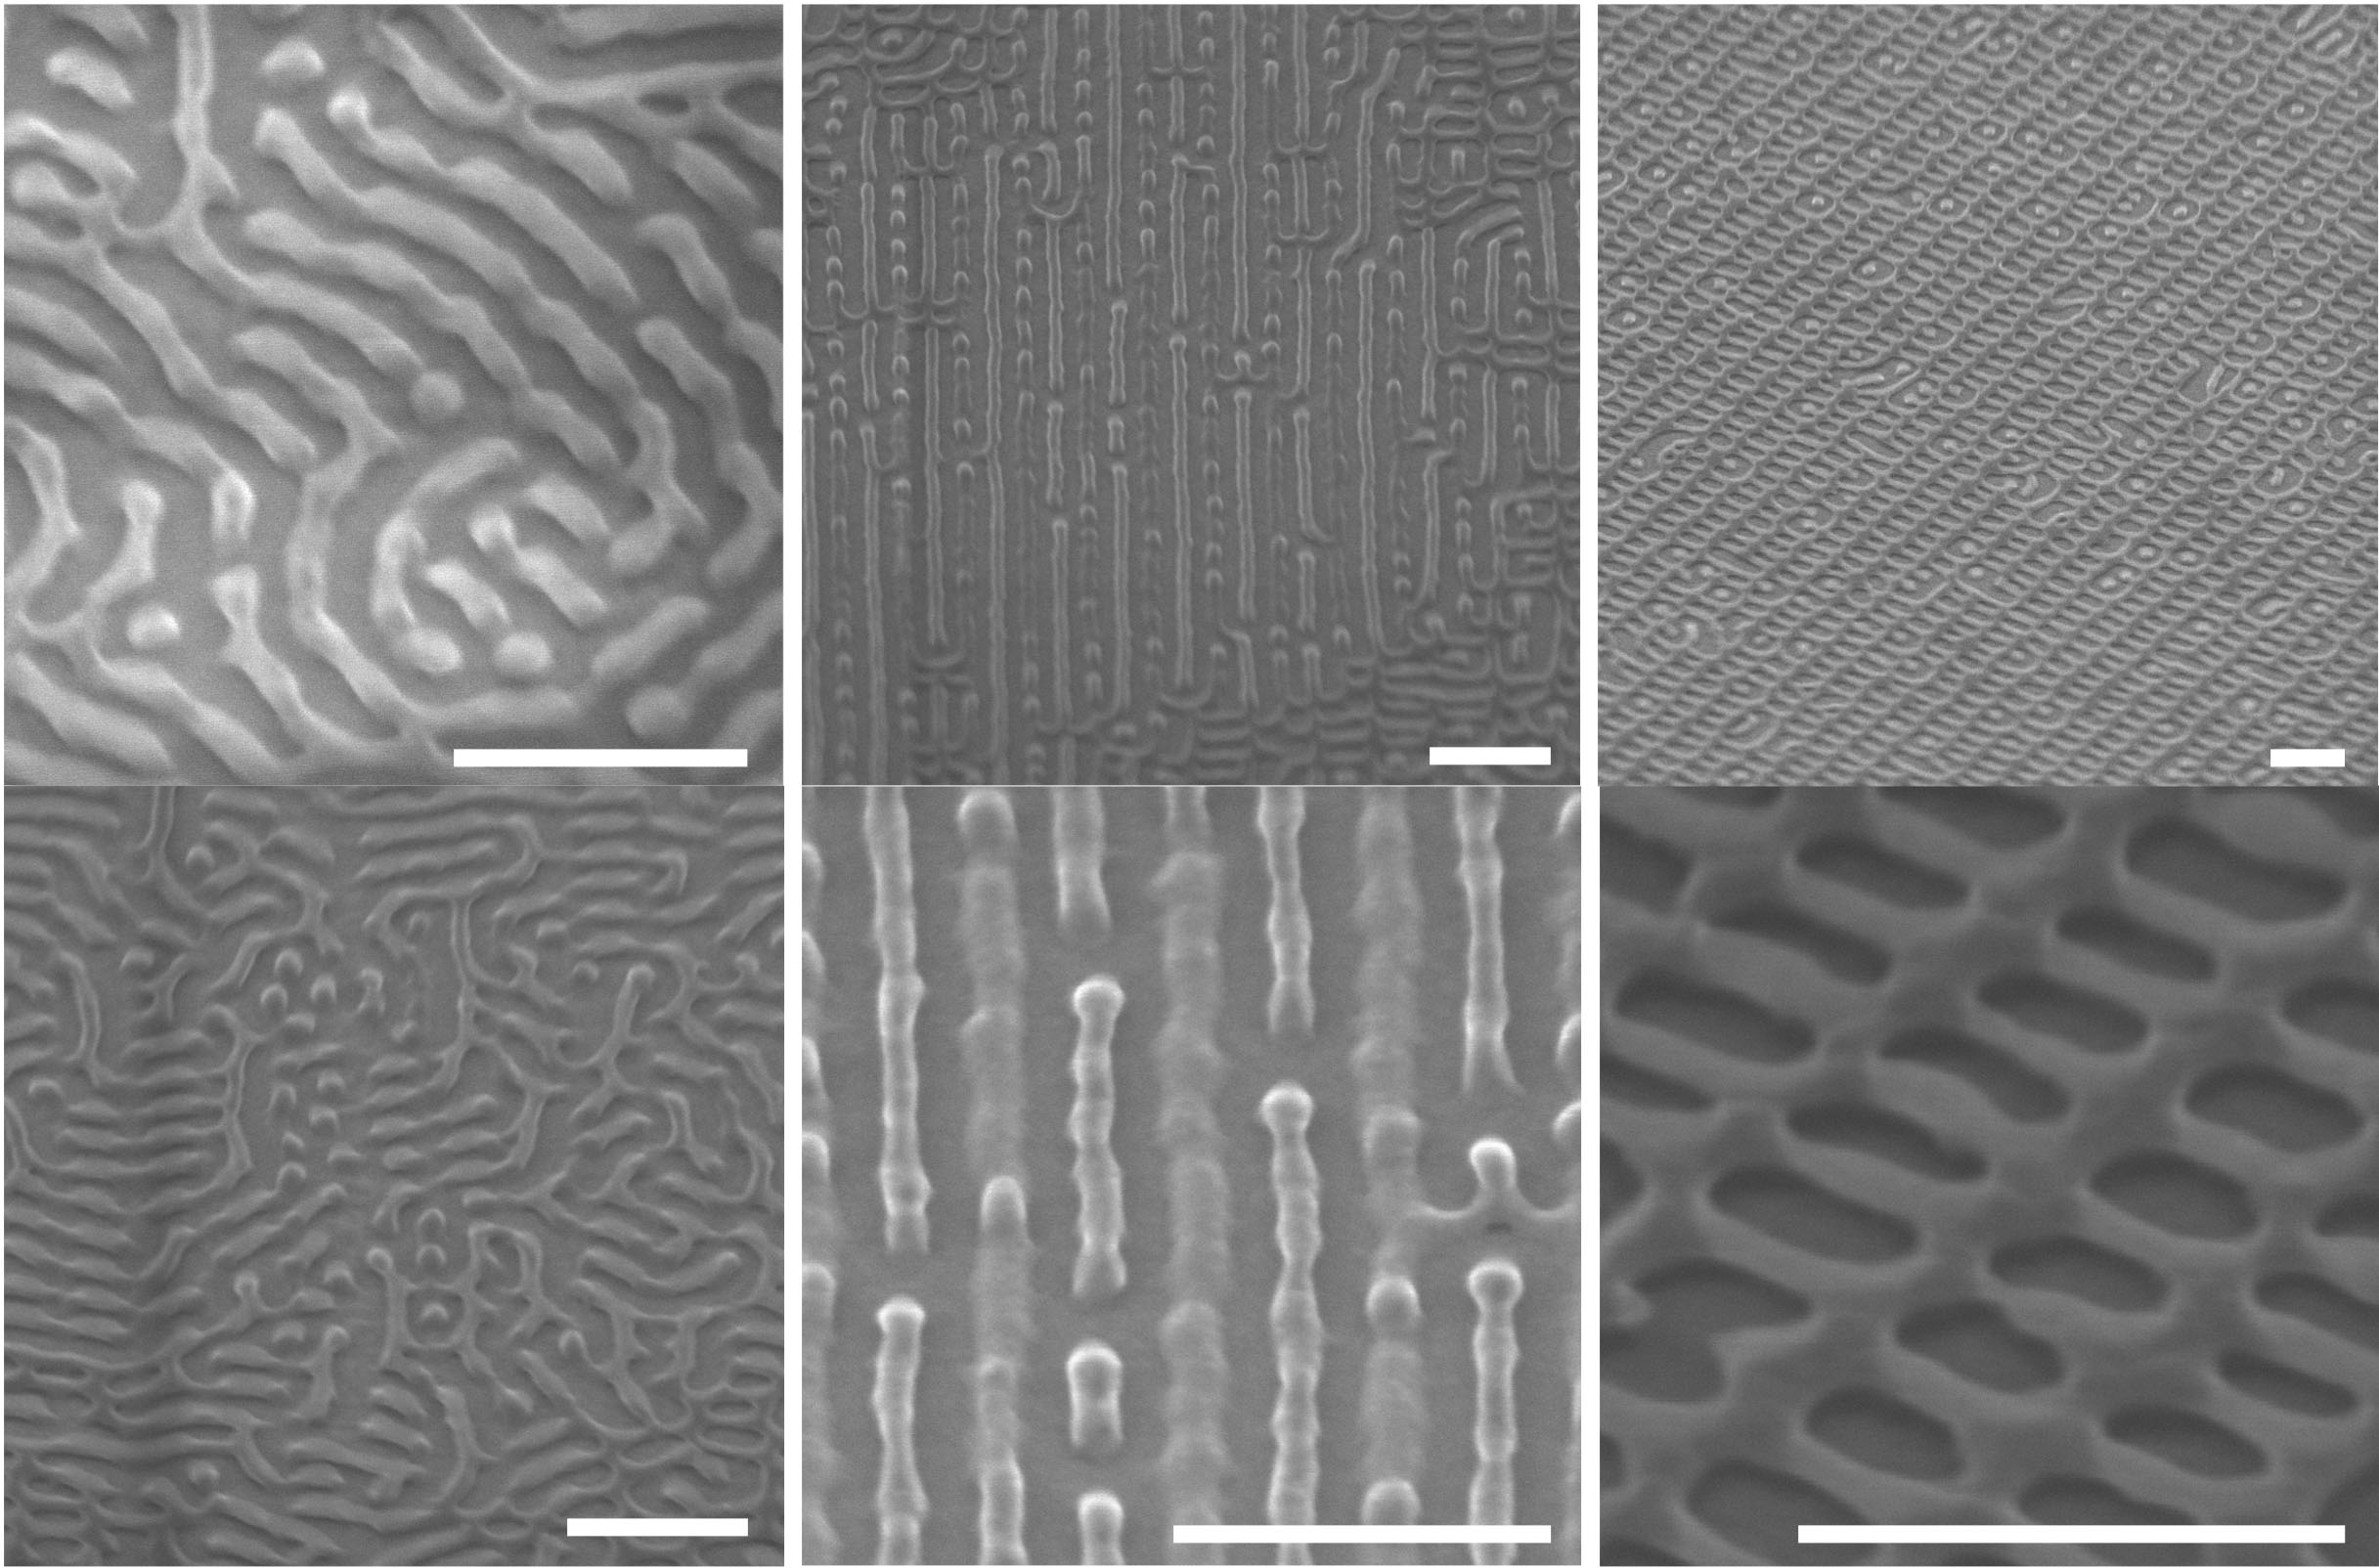 Scanning-electron microscopy images depict novel nanostructures discovered by artificial intelligence